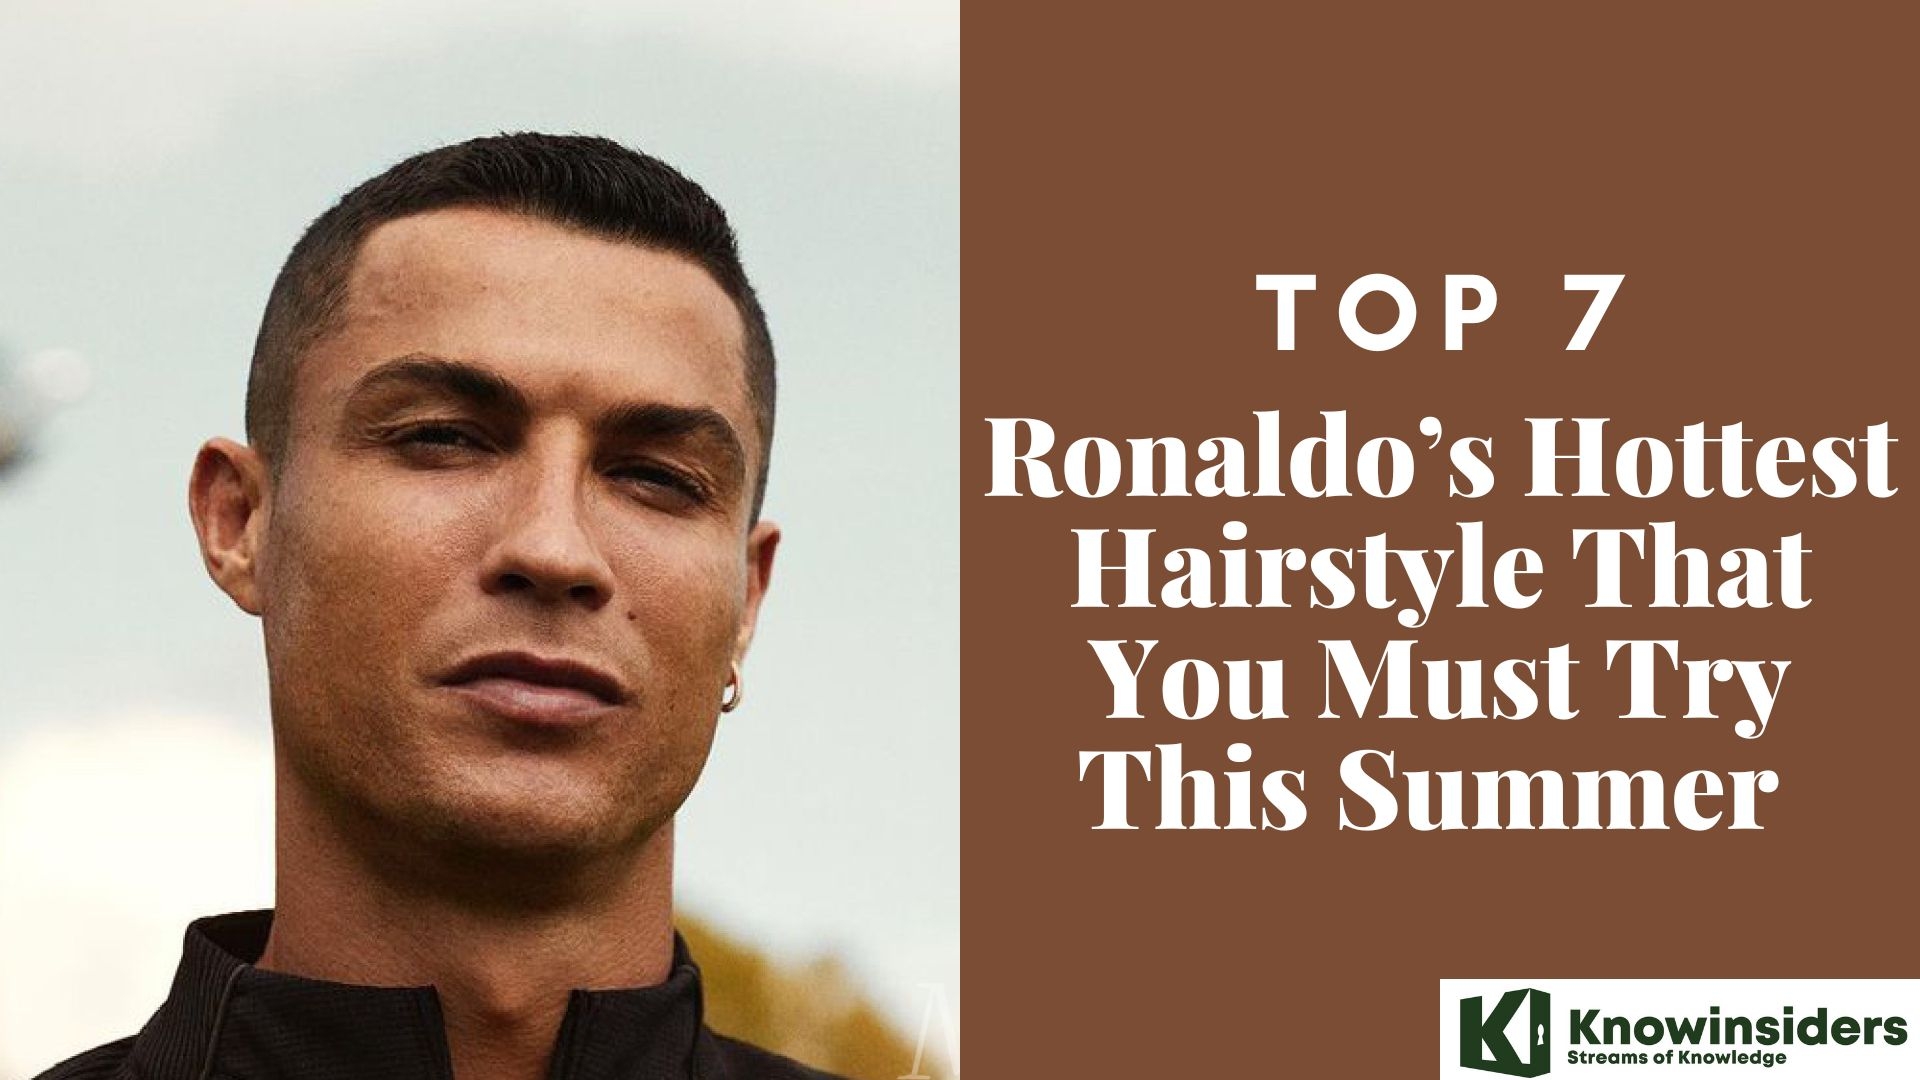 Top 7 Ronaldo’s Hottest Hairstyle That You Must Try This Summer  Knowinsiders.com